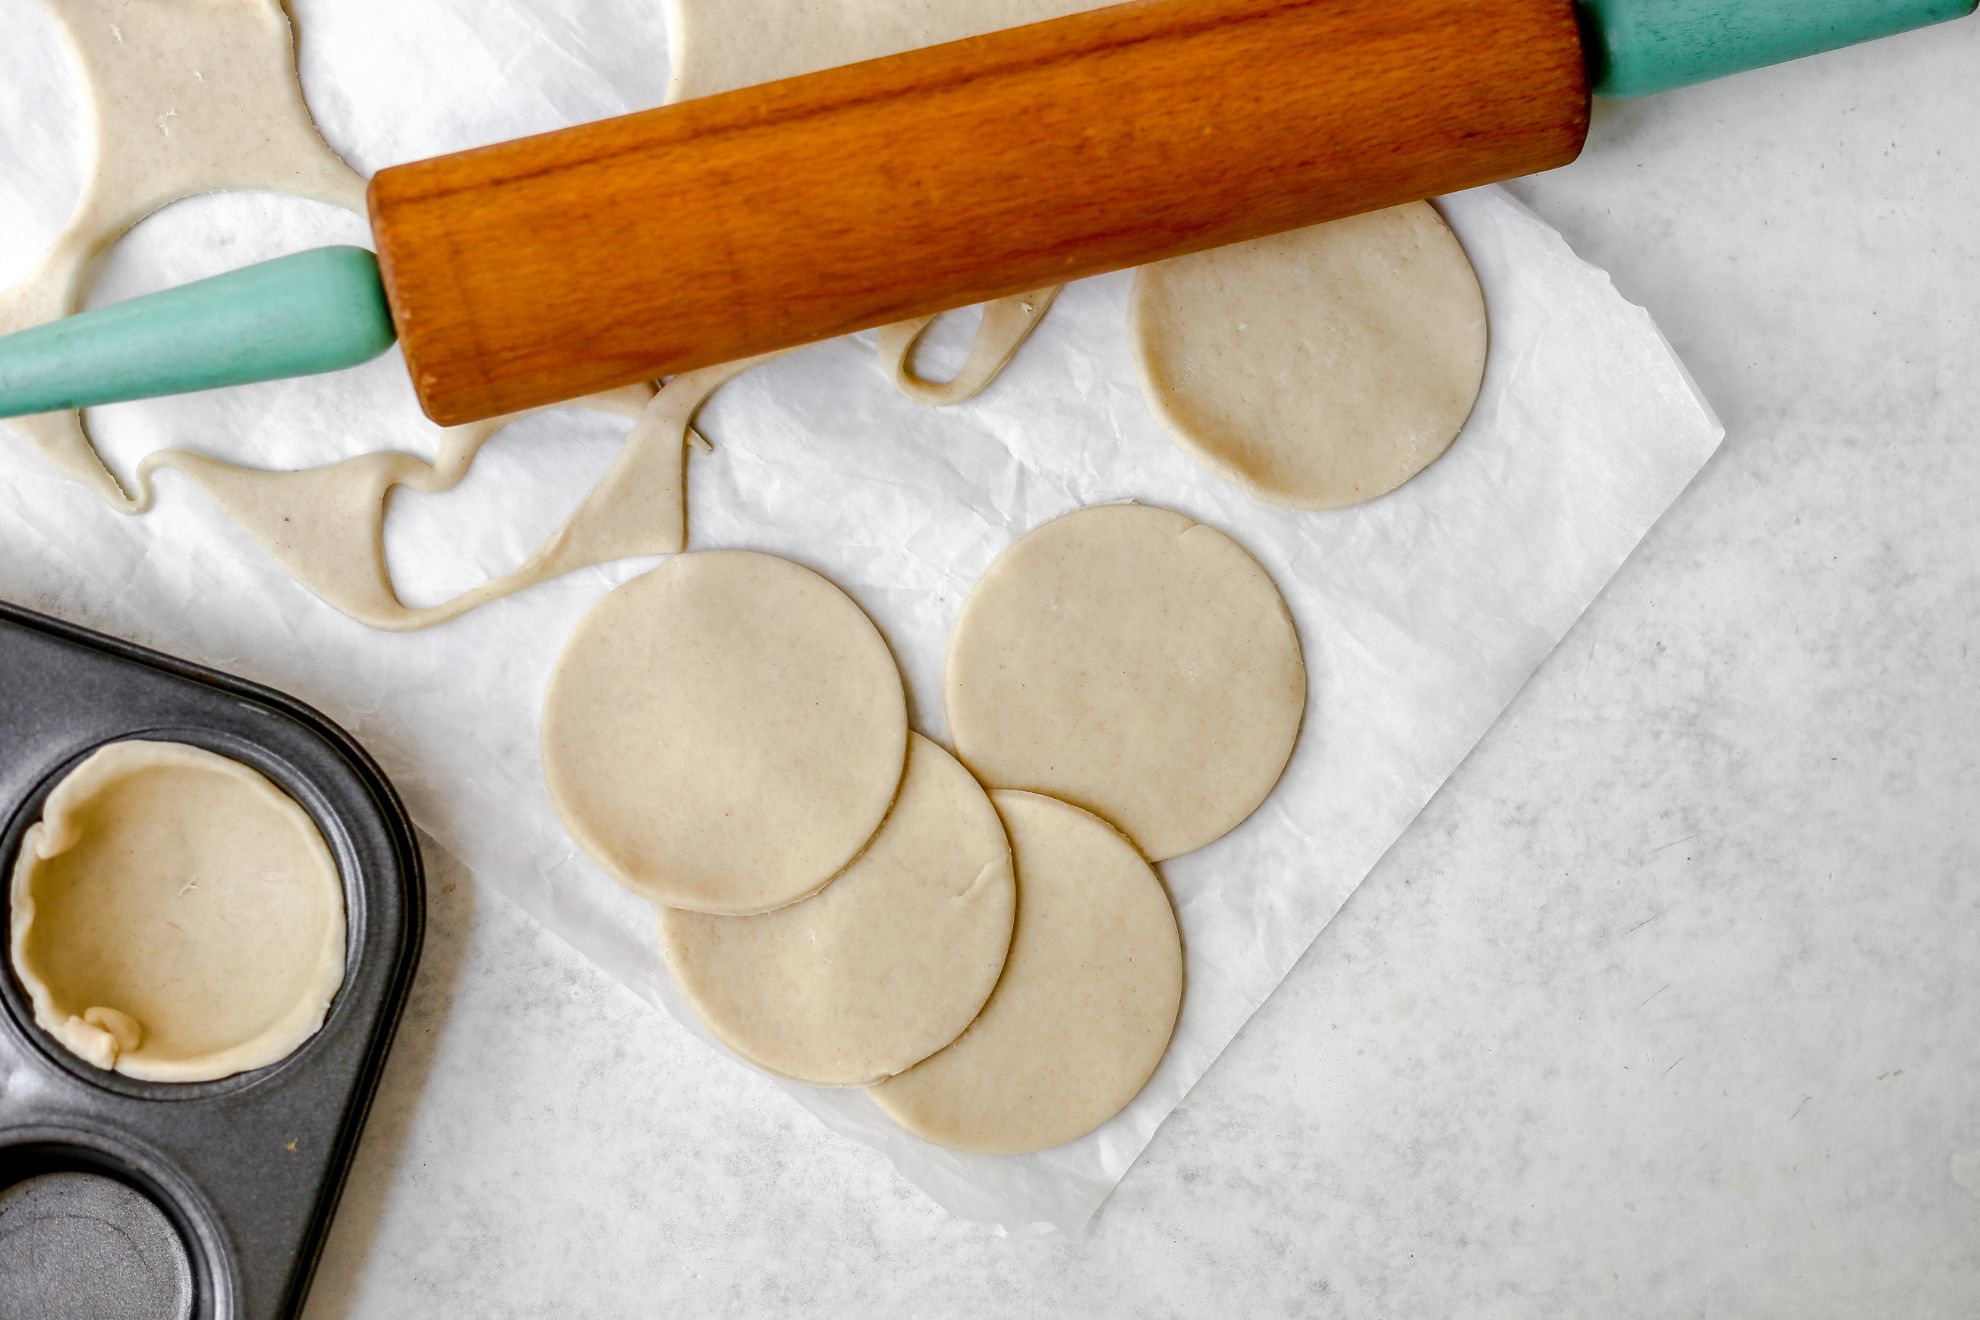 This is a horizontal overhead image of pie dough cut in circles. The dough circles are on a white piece of parchment paper with the leftover dough to the top left, a wood rolling pin with teal handles to the top center of the image, and the corner of a muffin tin with a pie dough round pressed into the cup and up the sides.